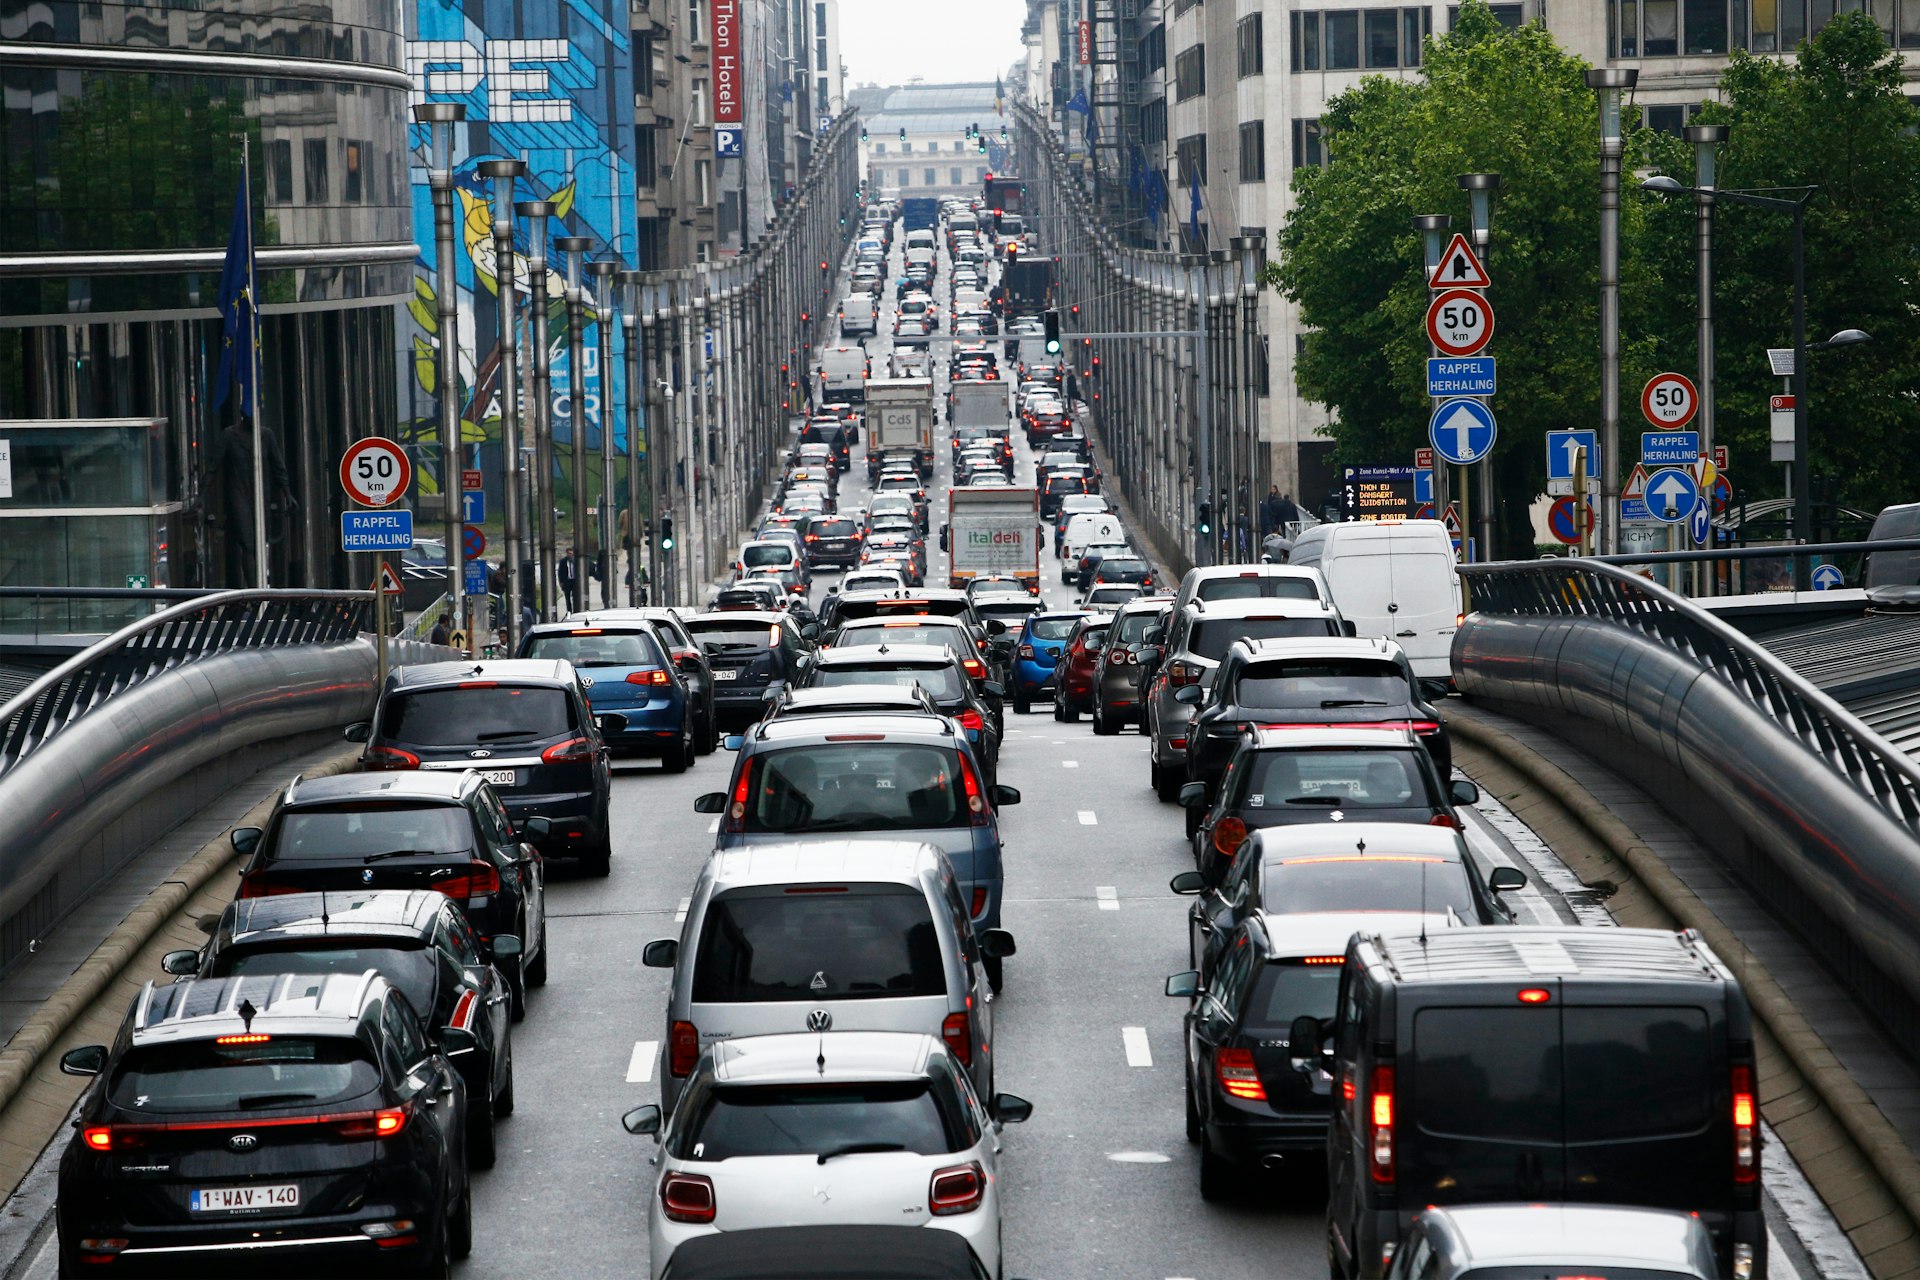 A traffic jam in a central street of Brussels